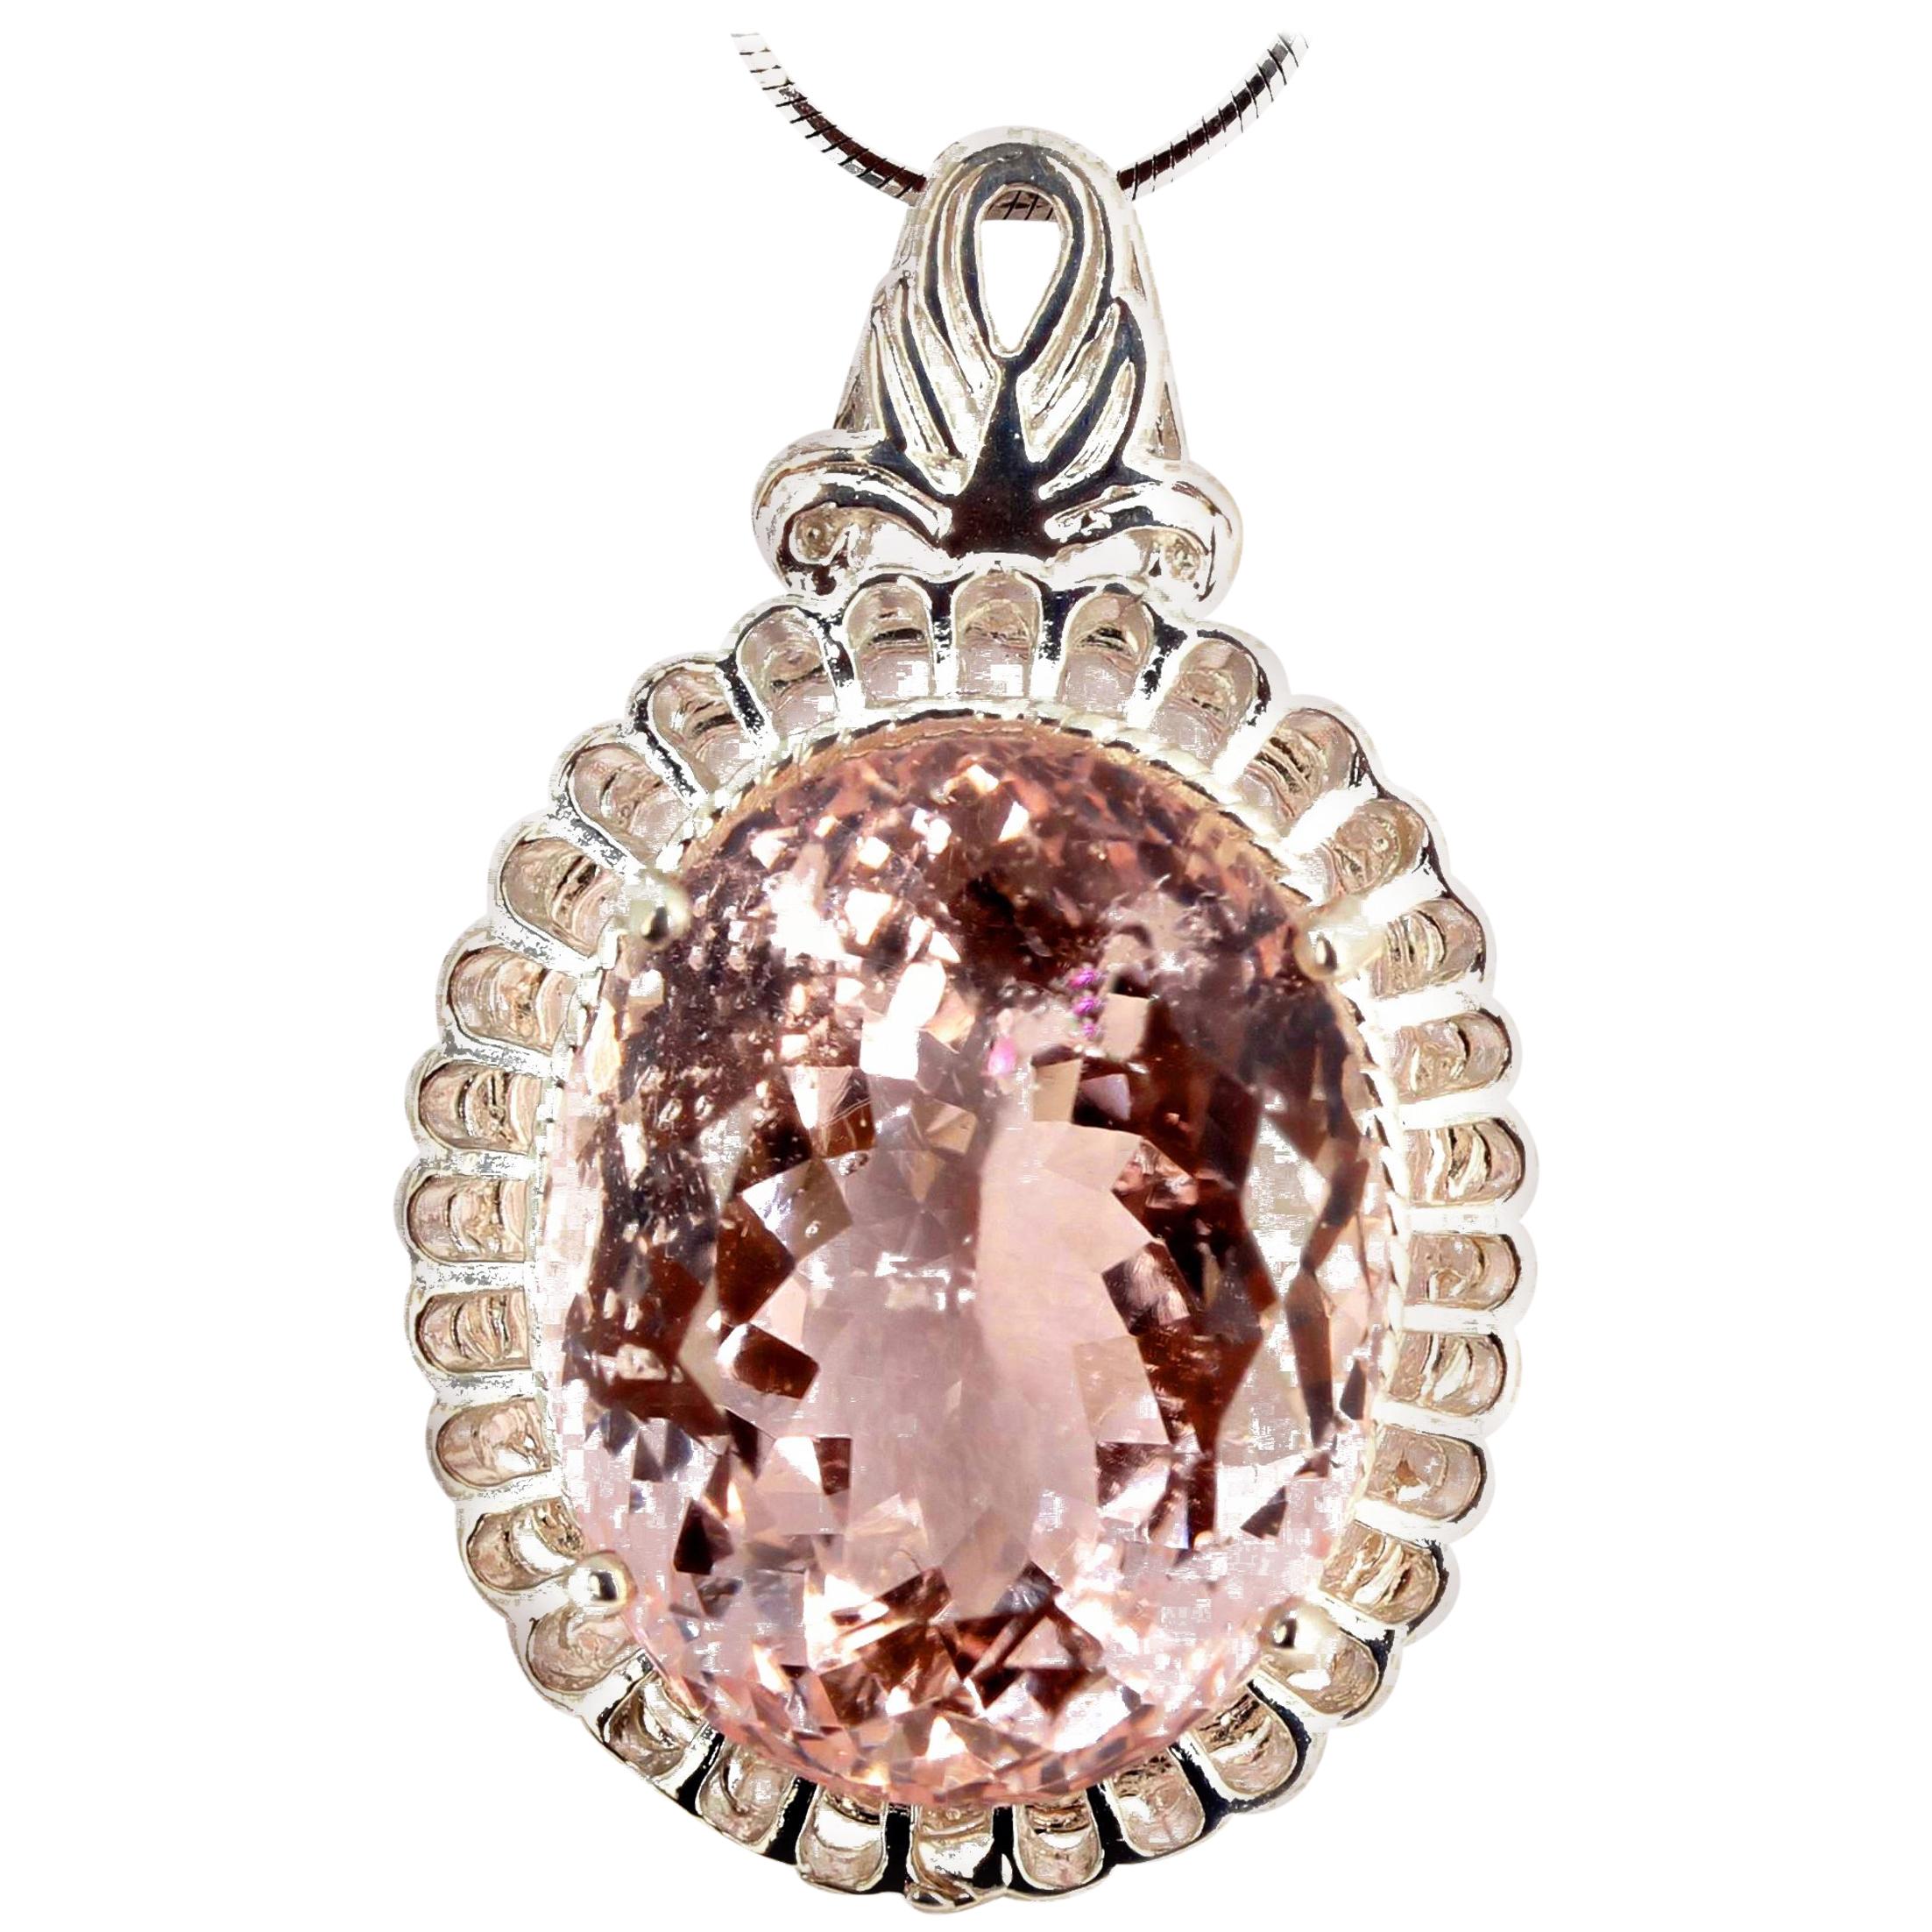 AJD Unusual Classic Large 29 Cts Morganite Sterling Silver Pendant